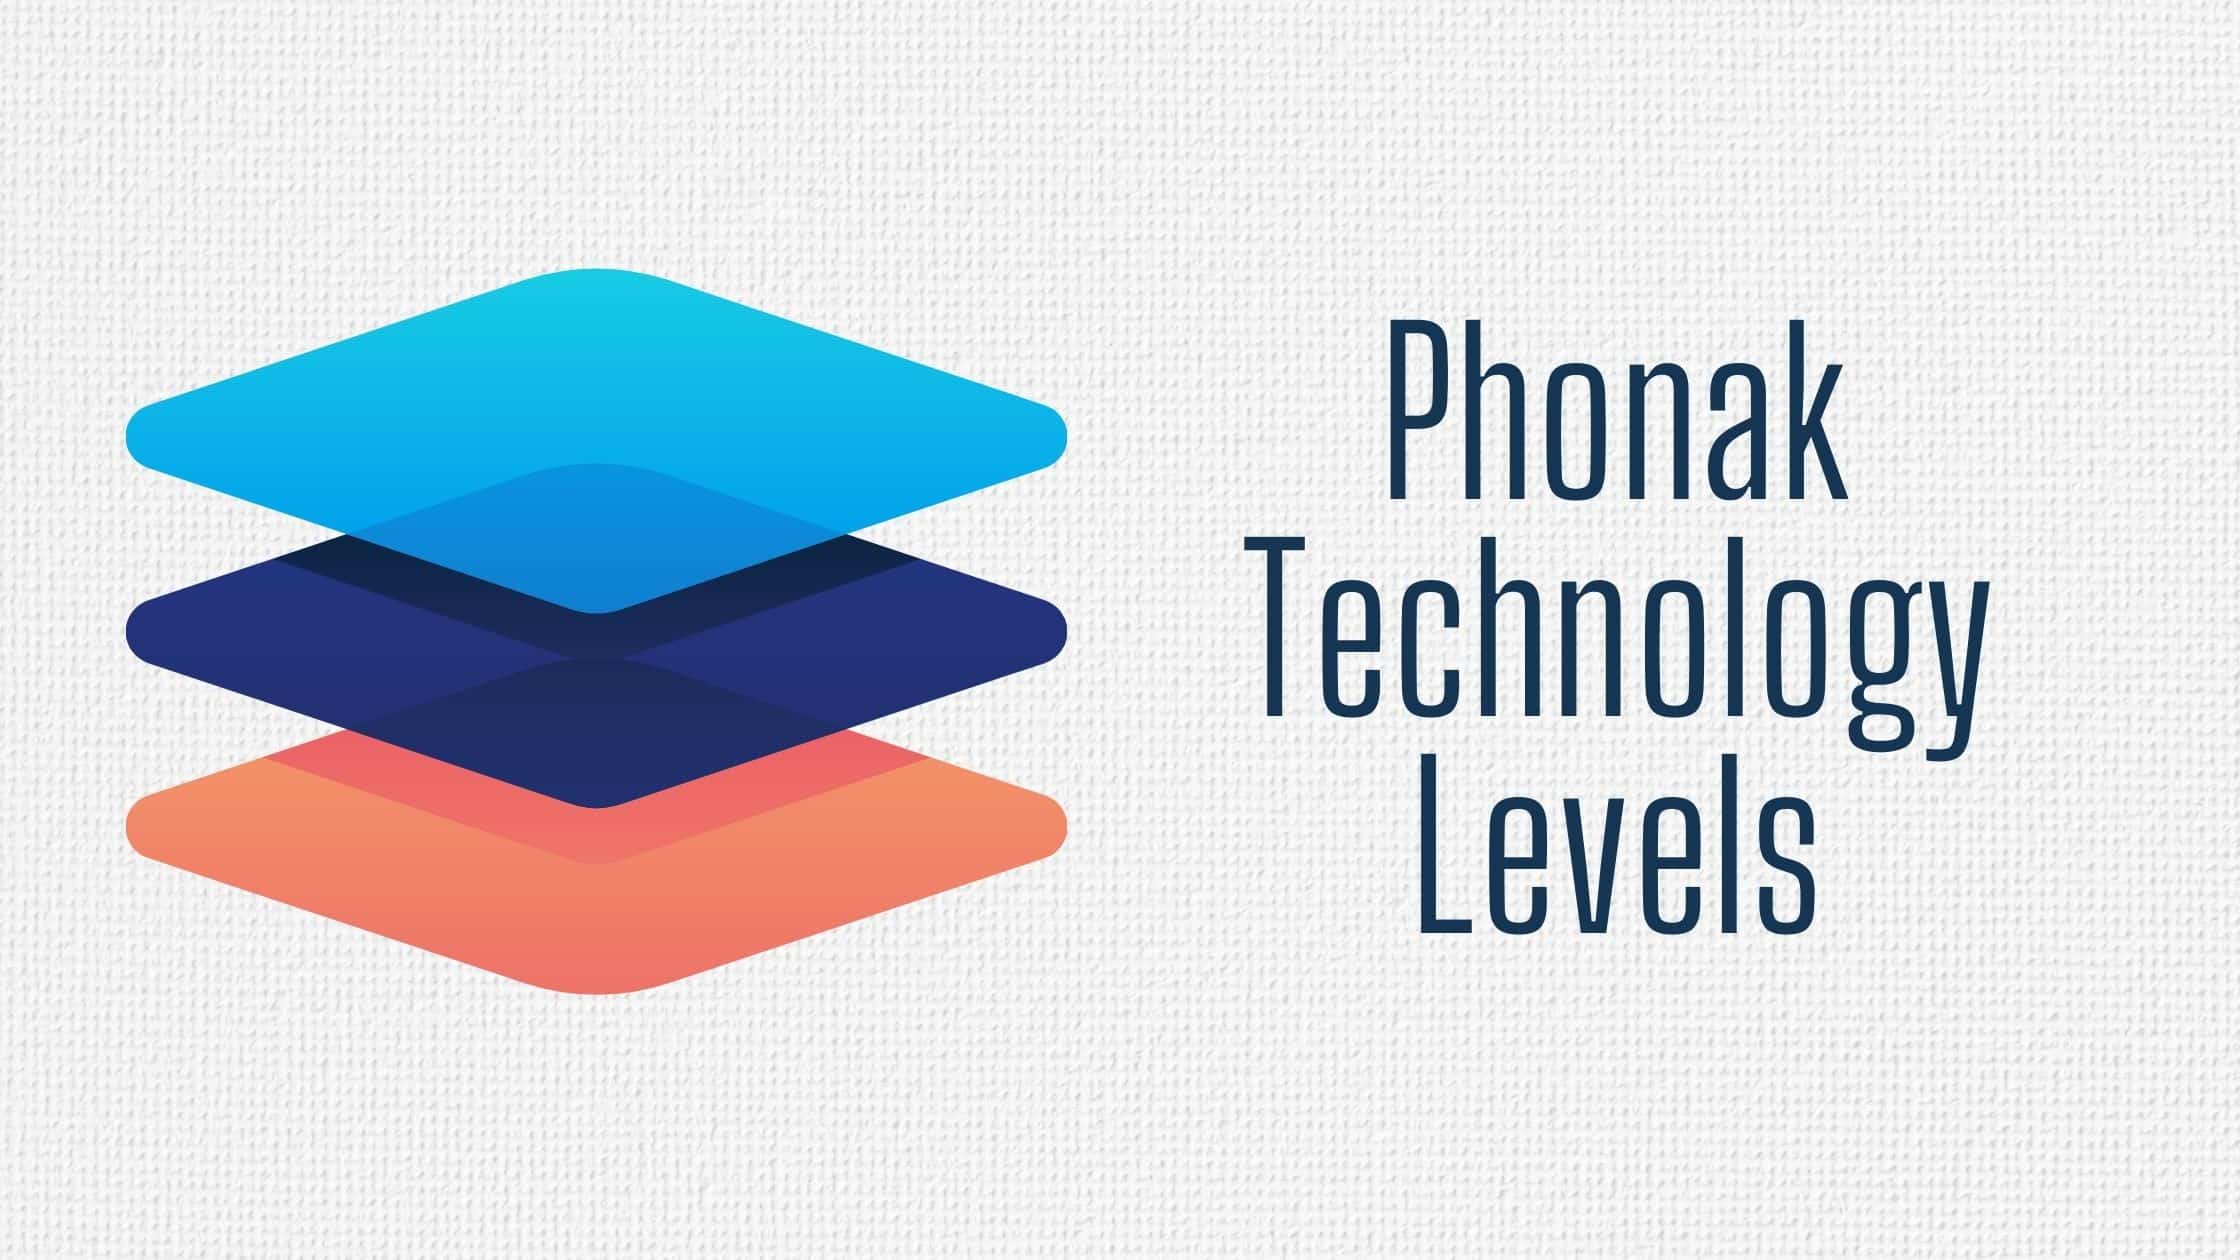 Featured image for “Phonak Technology Levels”